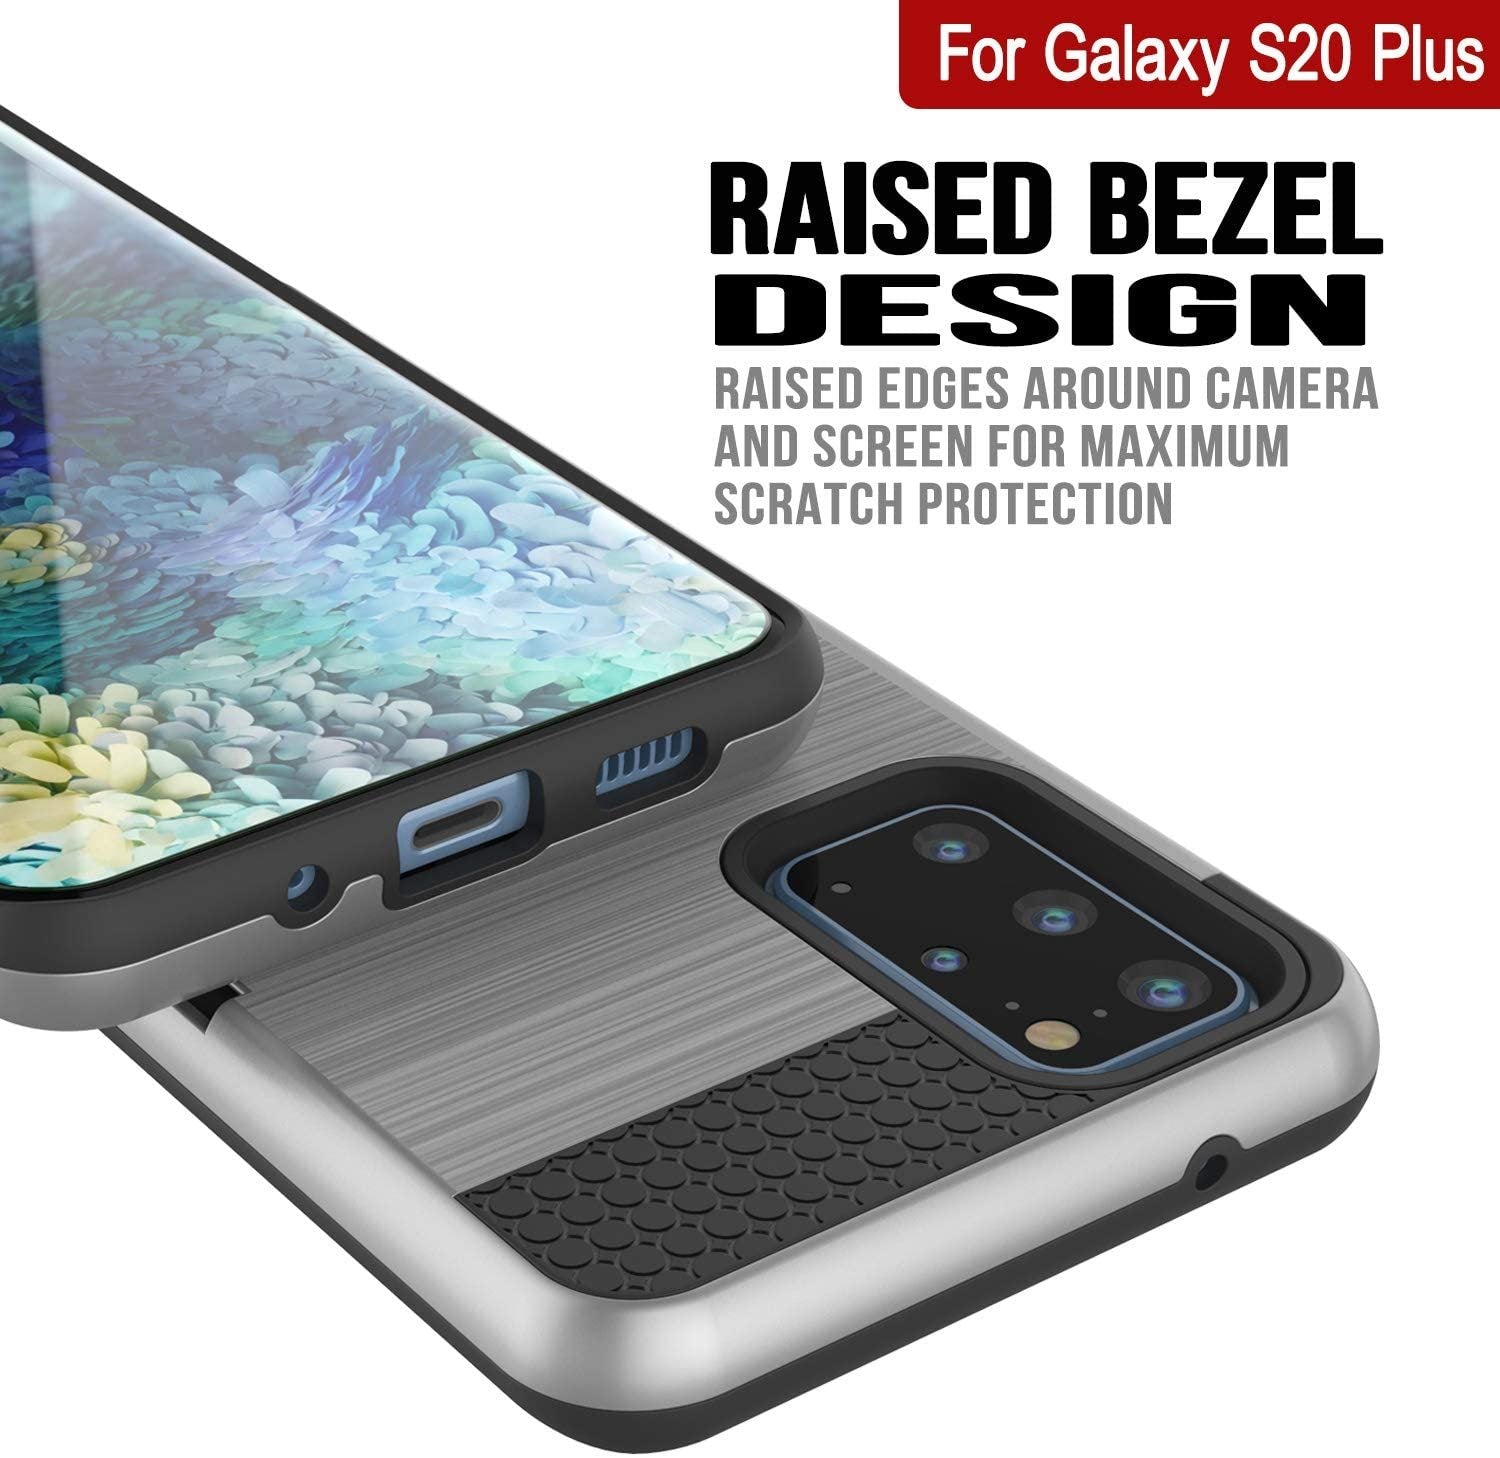 Galaxy S20+ Plus  Case, PUNKcase [SLOT Series] [Slim Fit] Dual-Layer Armor Cover w/Integrated Anti-Shock System, Credit Card Slot [Silver]